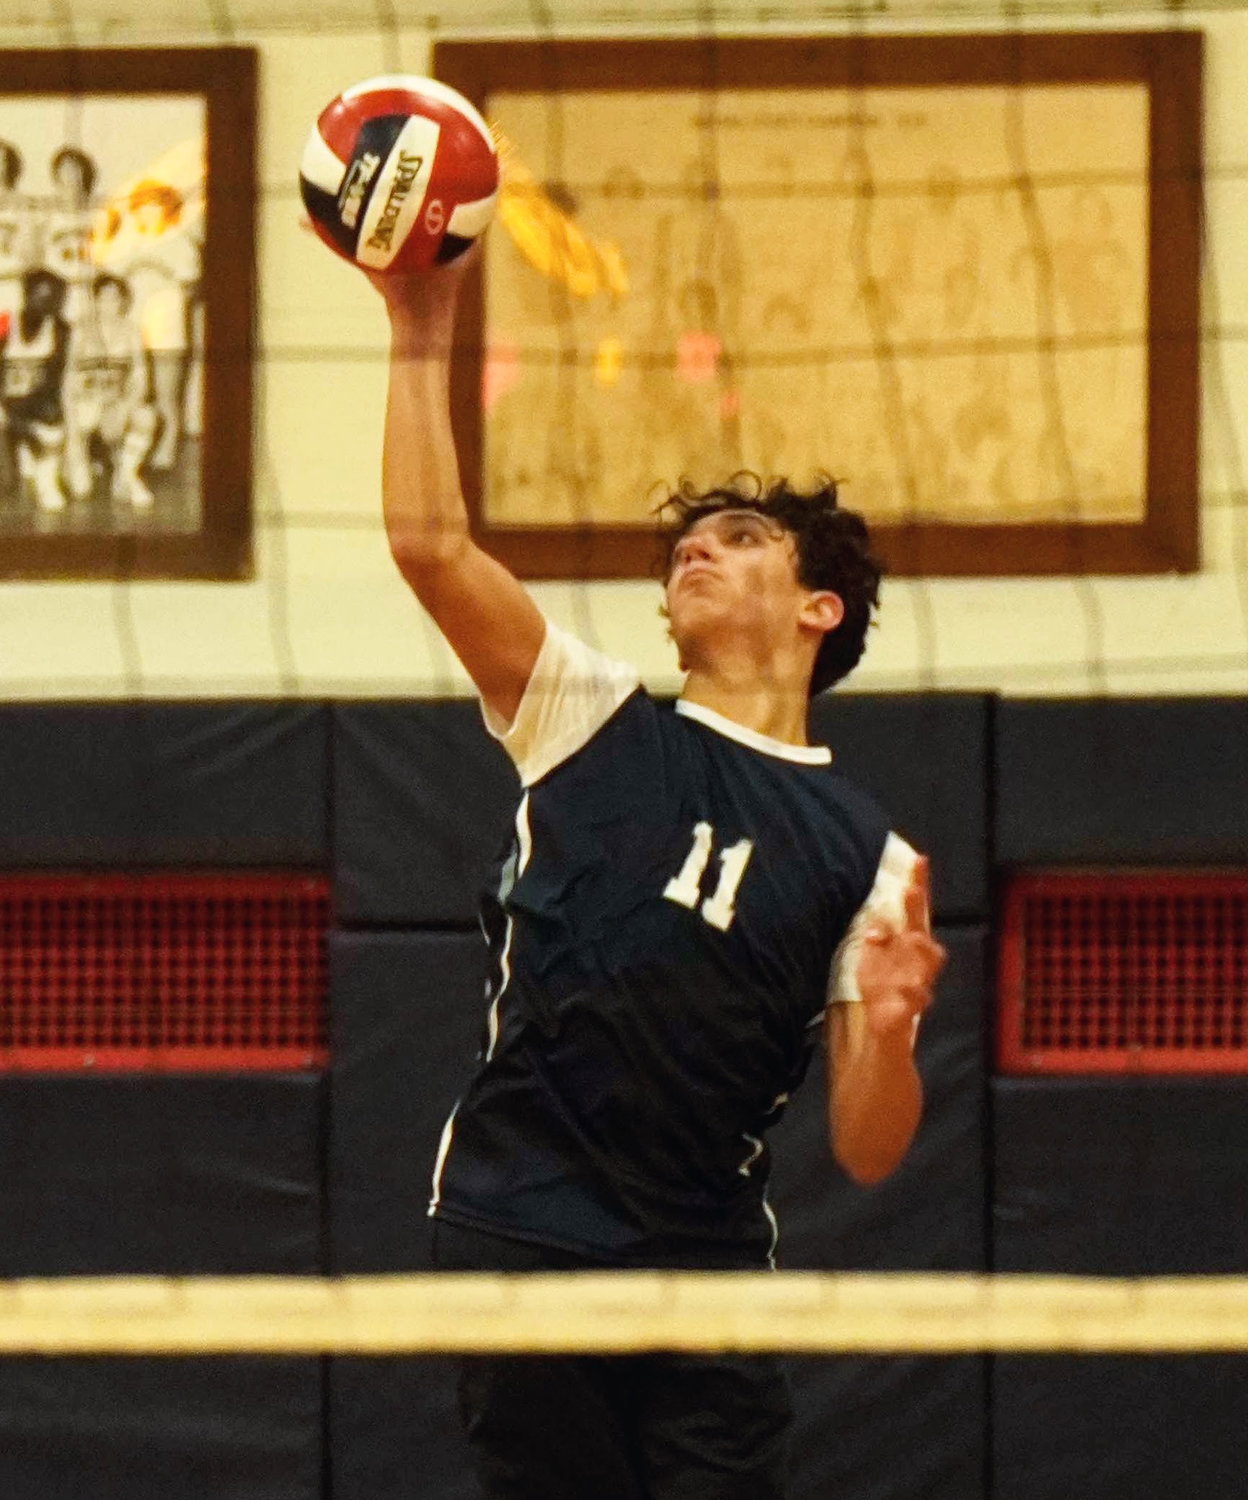 Dylan Avdoo is Hewlett’s leader in assists and also a key from the service line as his 36 aces suggests.